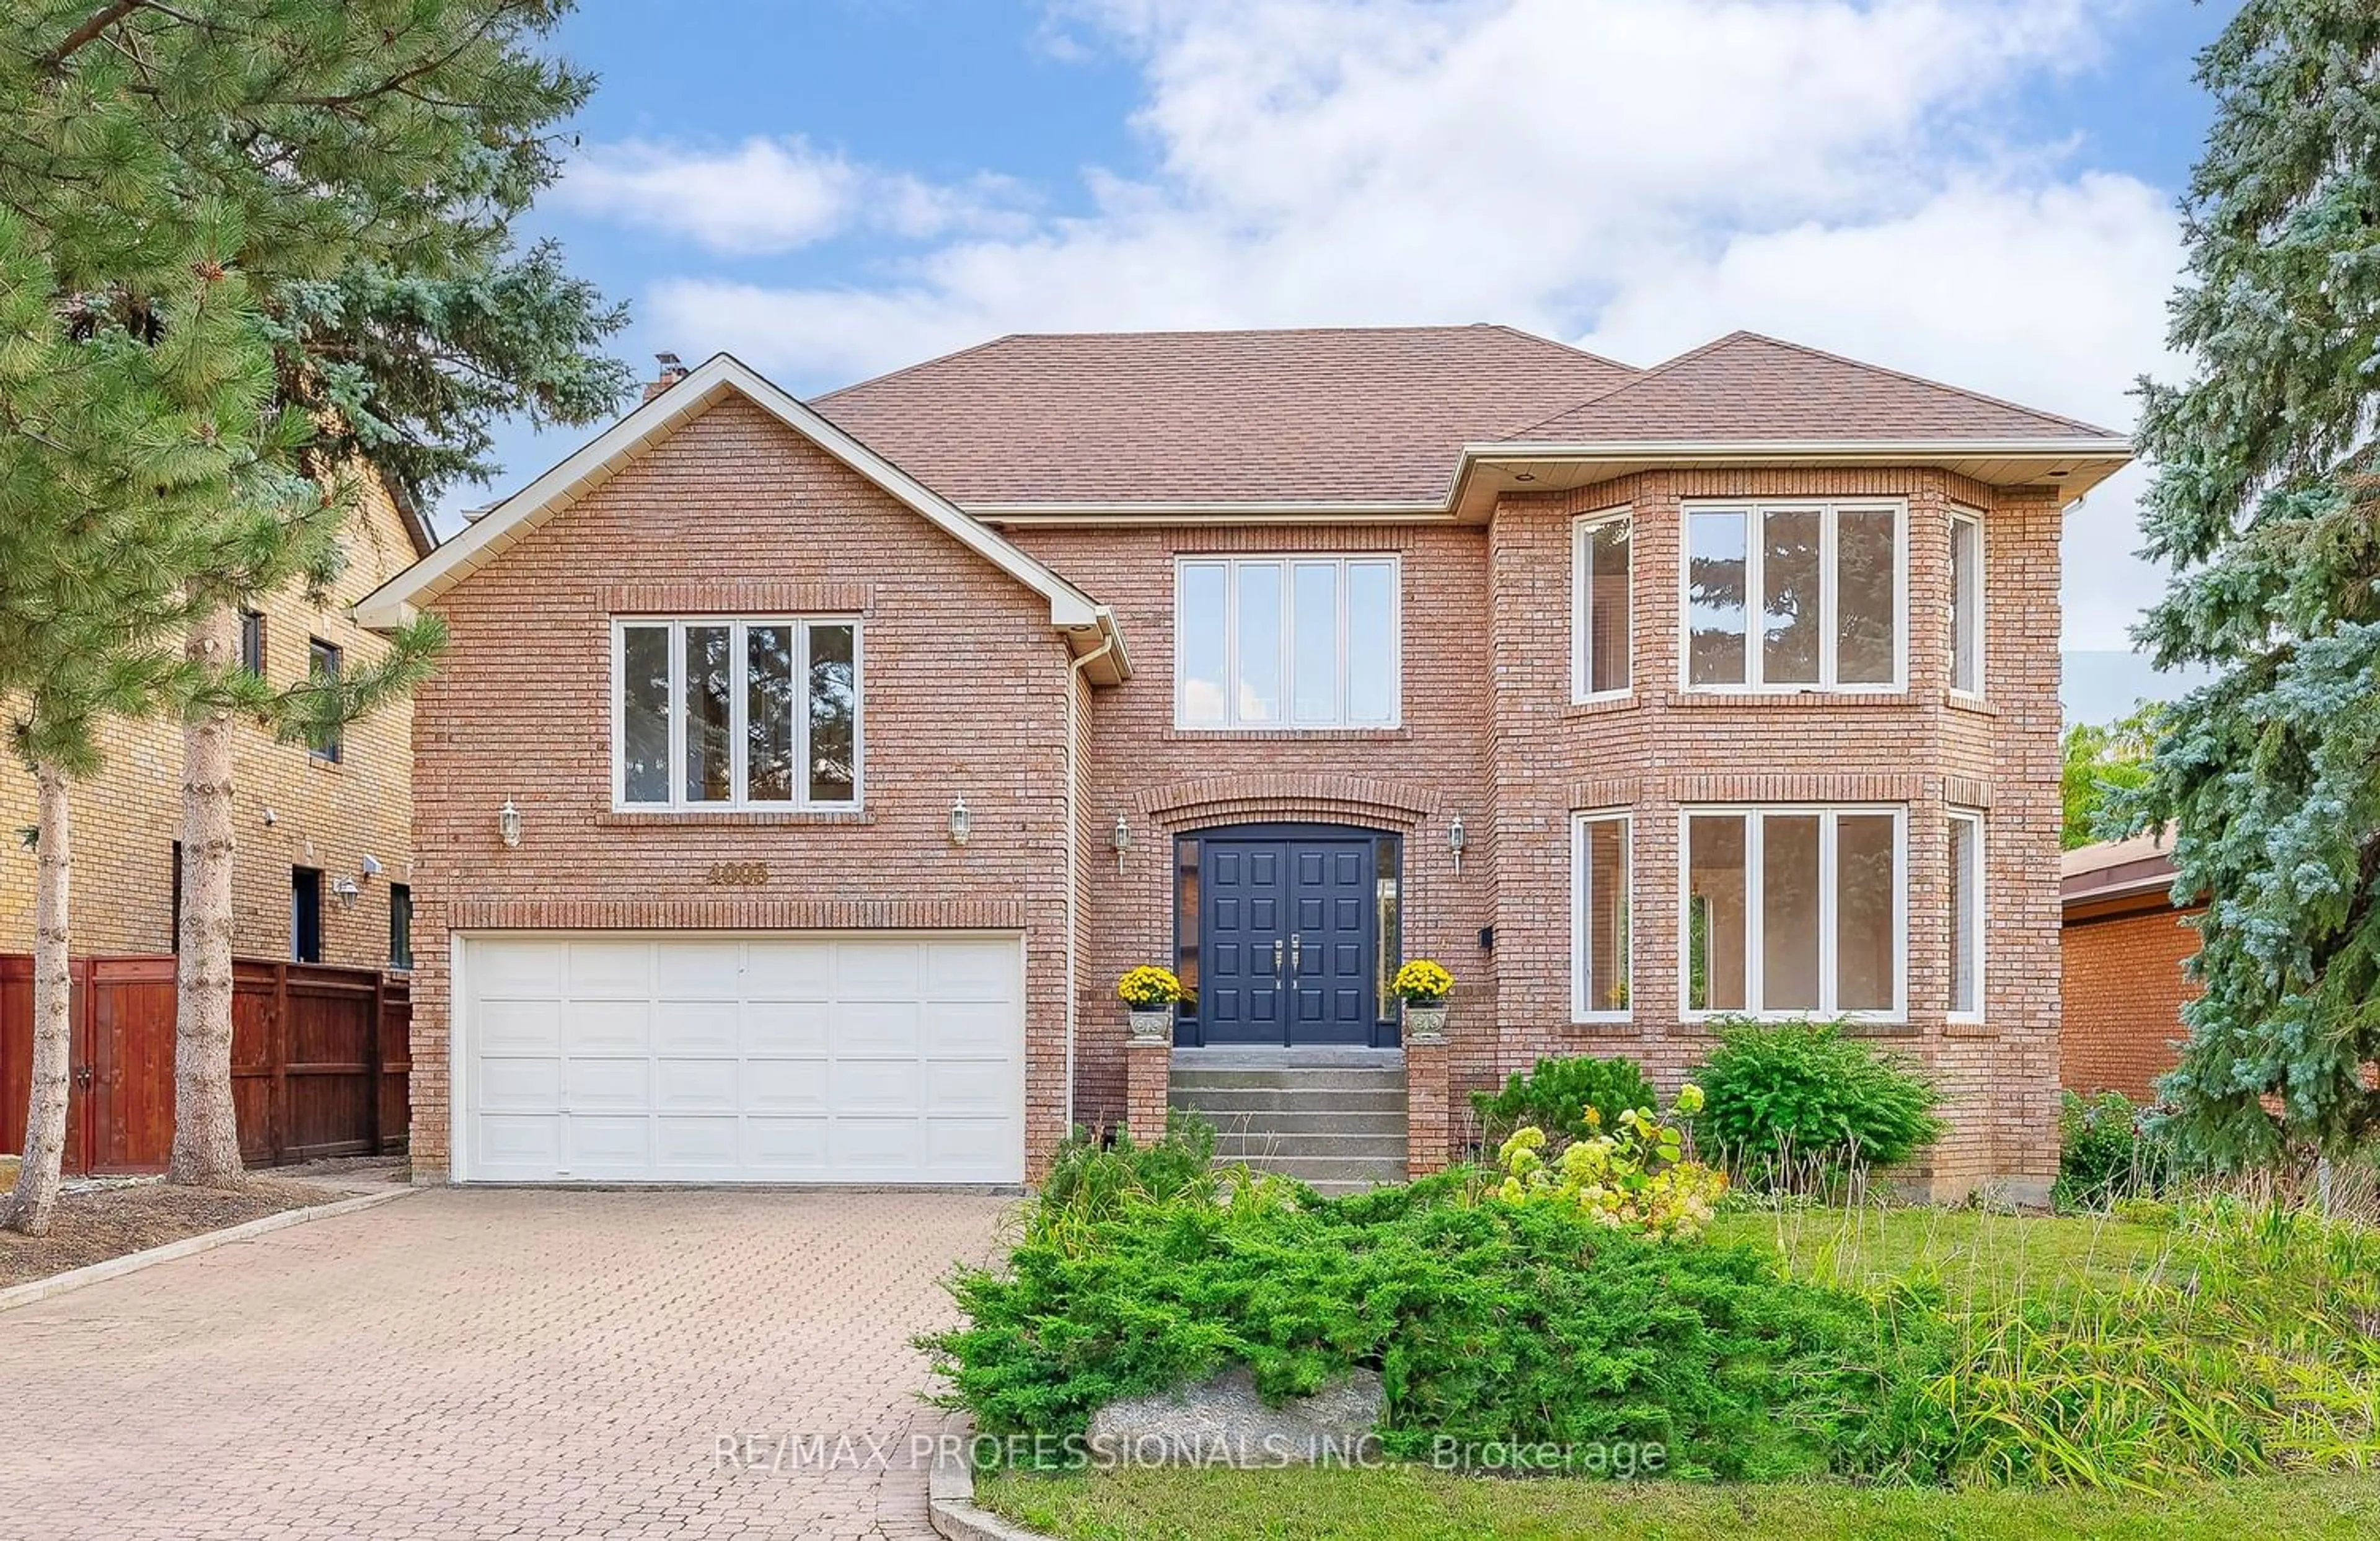 Home with brick exterior material for 4003 River Mill Way, Mississauga Ontario L4W 4C1